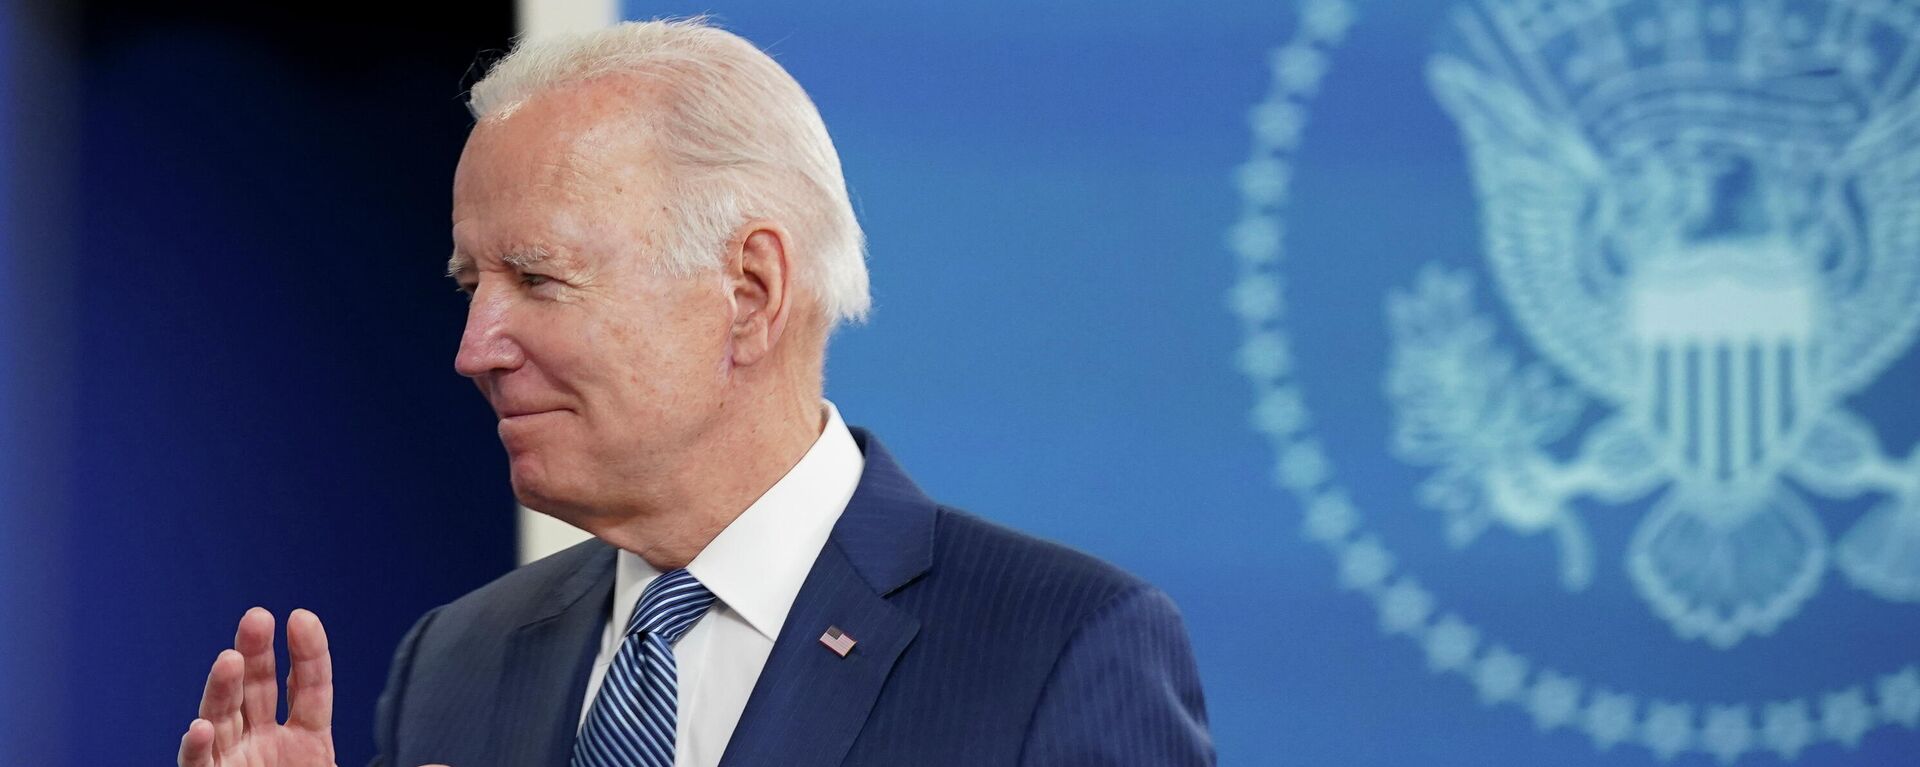 U.S. President Joe Biden departs after speaking about his administration's efforts to ease supply chain issues during the holiday season, at the White House in Washington, U.S., December 1, 2021 - Sputnik International, 1920, 02.12.2021